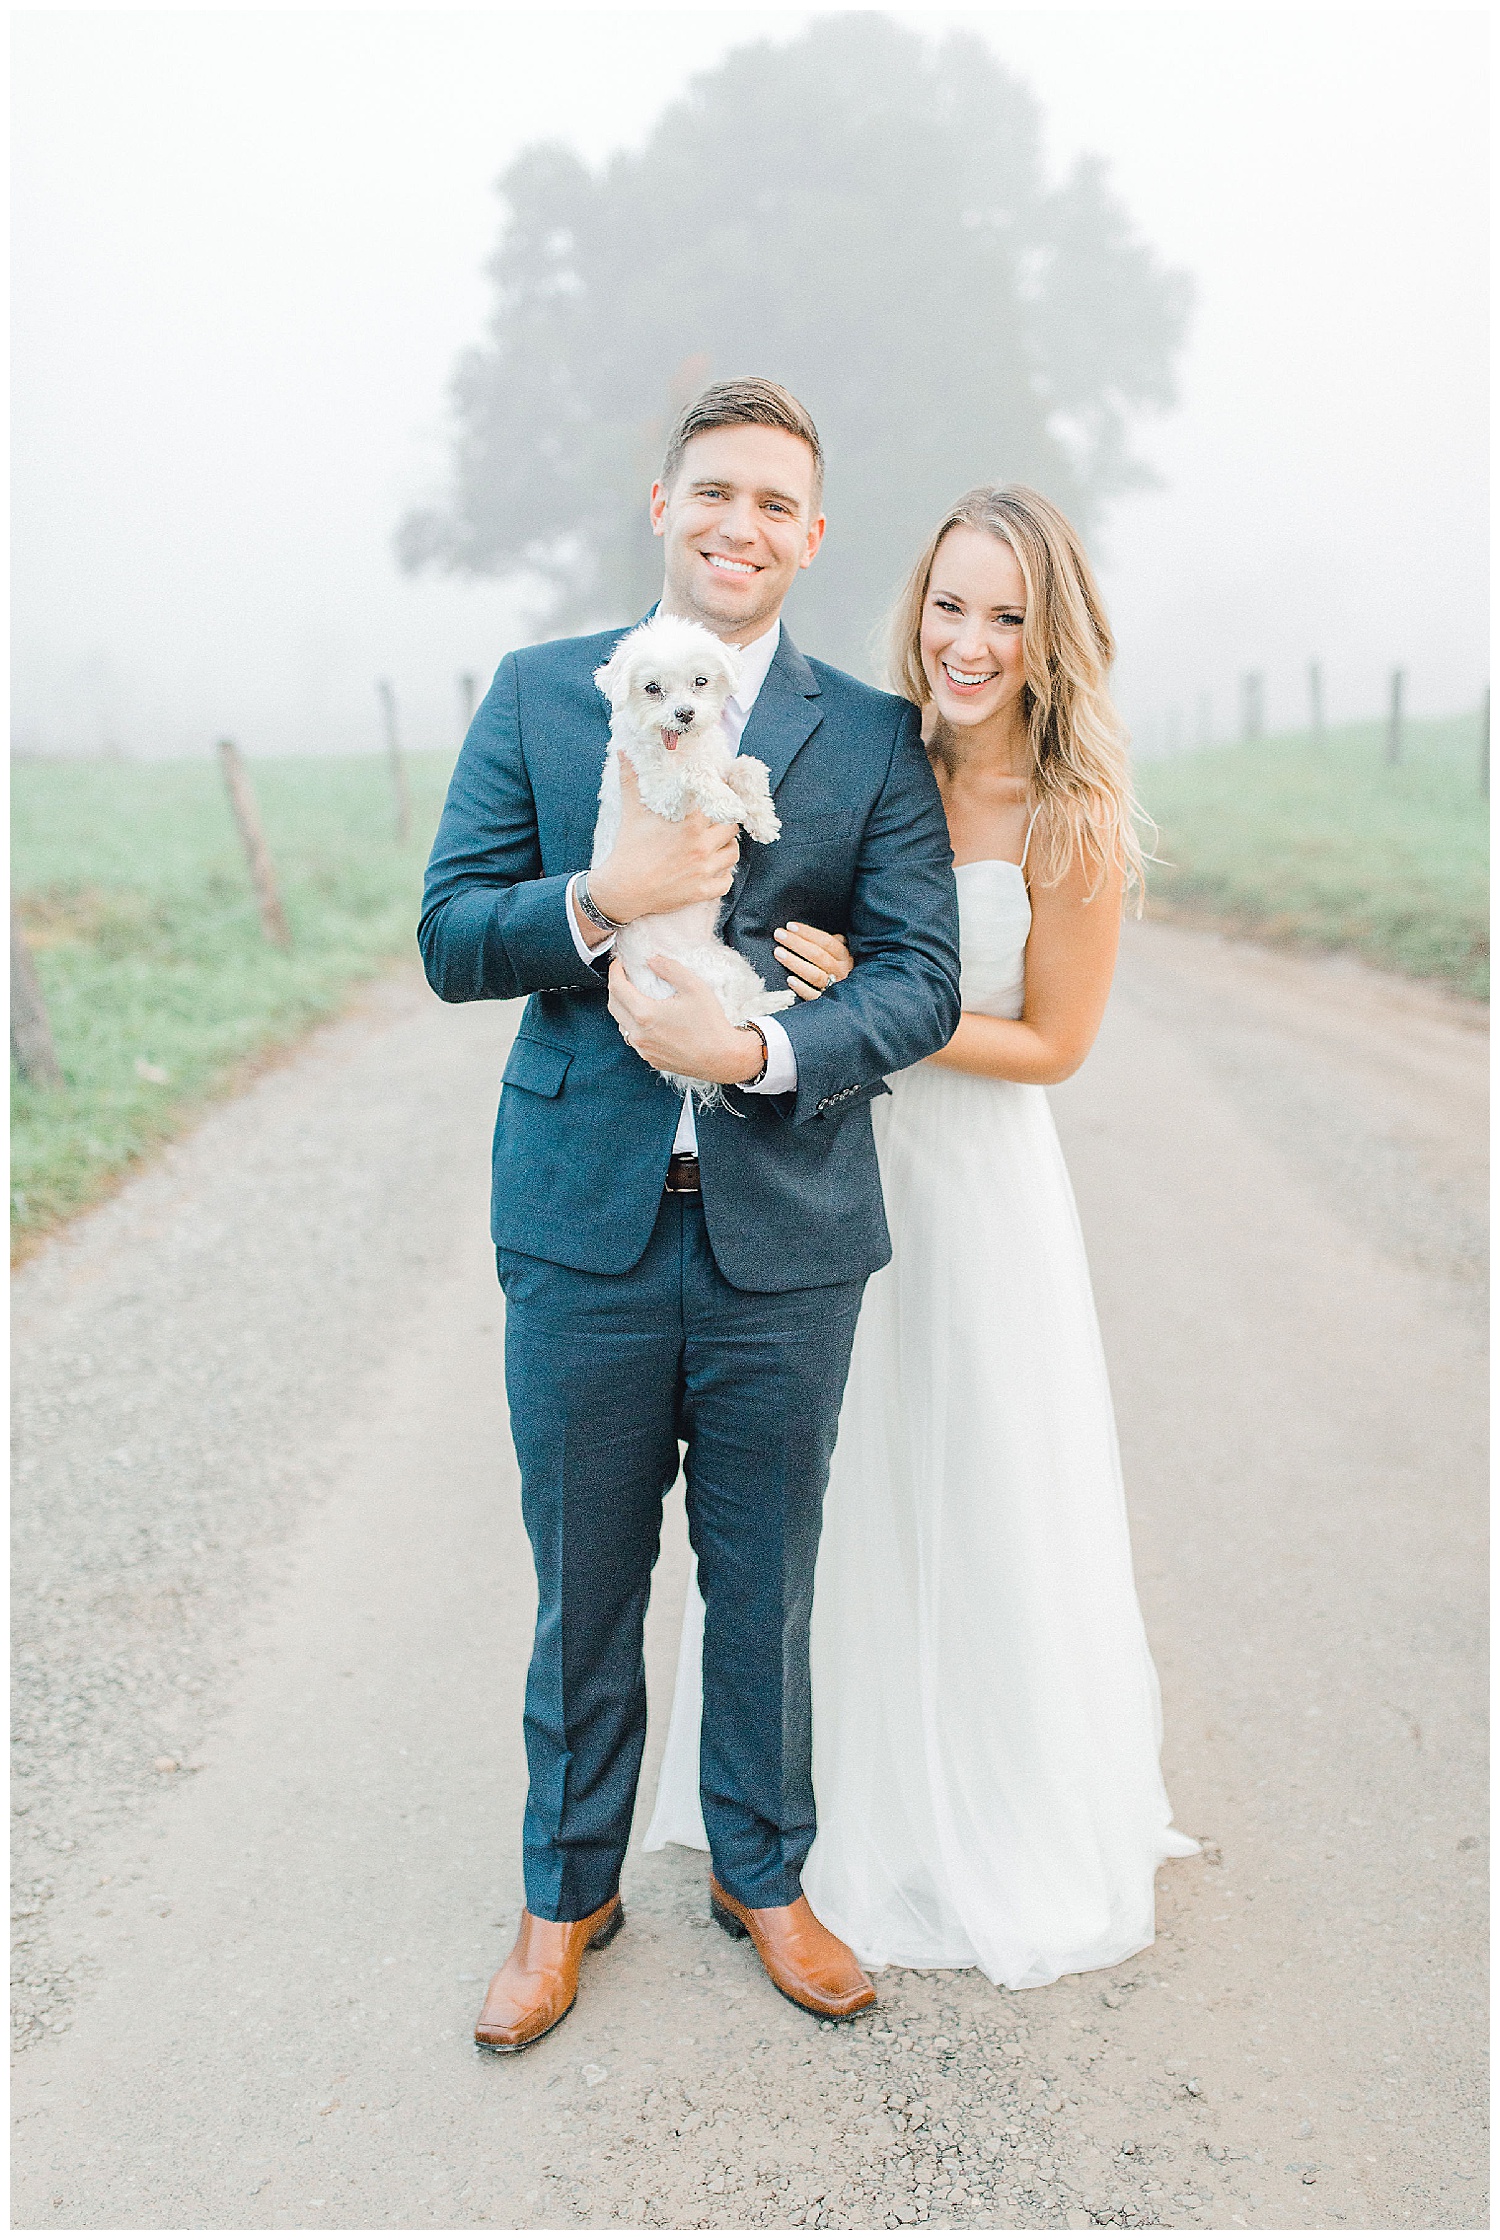 Emma Rose Company recently got to travel all the way to Nashville to photograph the most beautiful post-wedding bride and groom portraits in the Great Smoky Mountains with a gorgeous couple! Nashville wedding inspiration at it's finest._0006.jpg